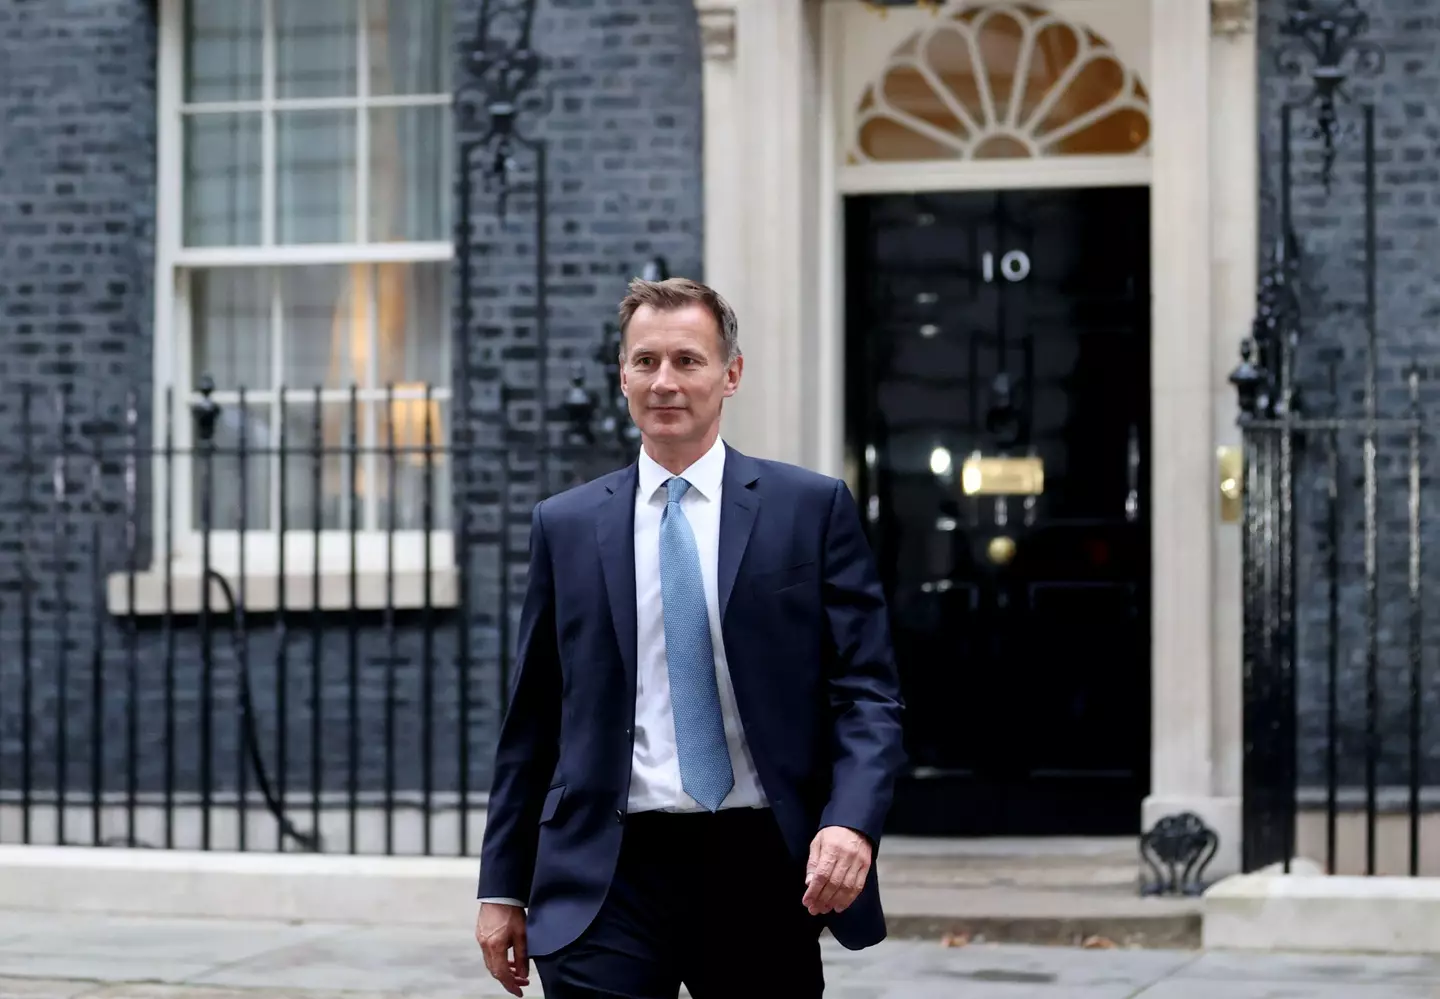 Jeremy Hunt has been asked to reconsider the April price increase.